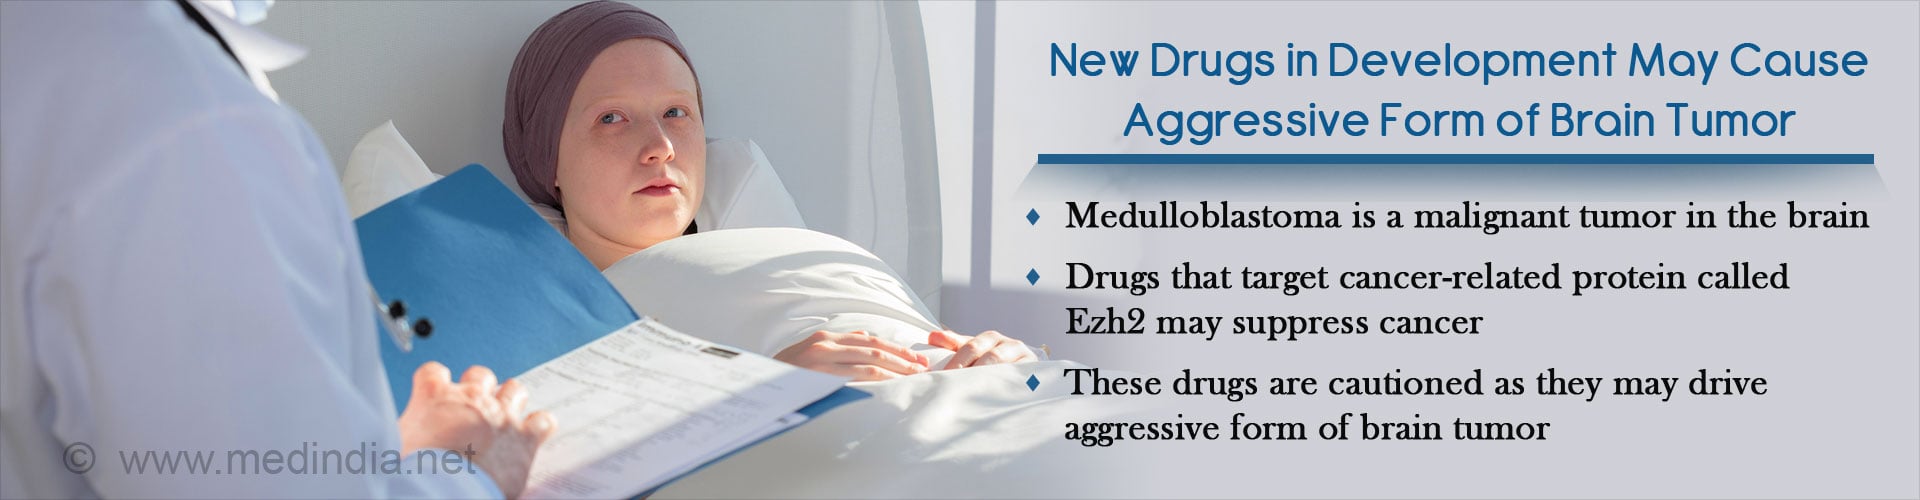 New drugs in development may cause aggressive form of brain tumor
- Medulloblastoma is a malignant tumor in the brain
- Drugs that target cancer-related protein called Ezh2 may supress cancer
- The drugs are cautioned as they may drive aggressive form of brain tumor